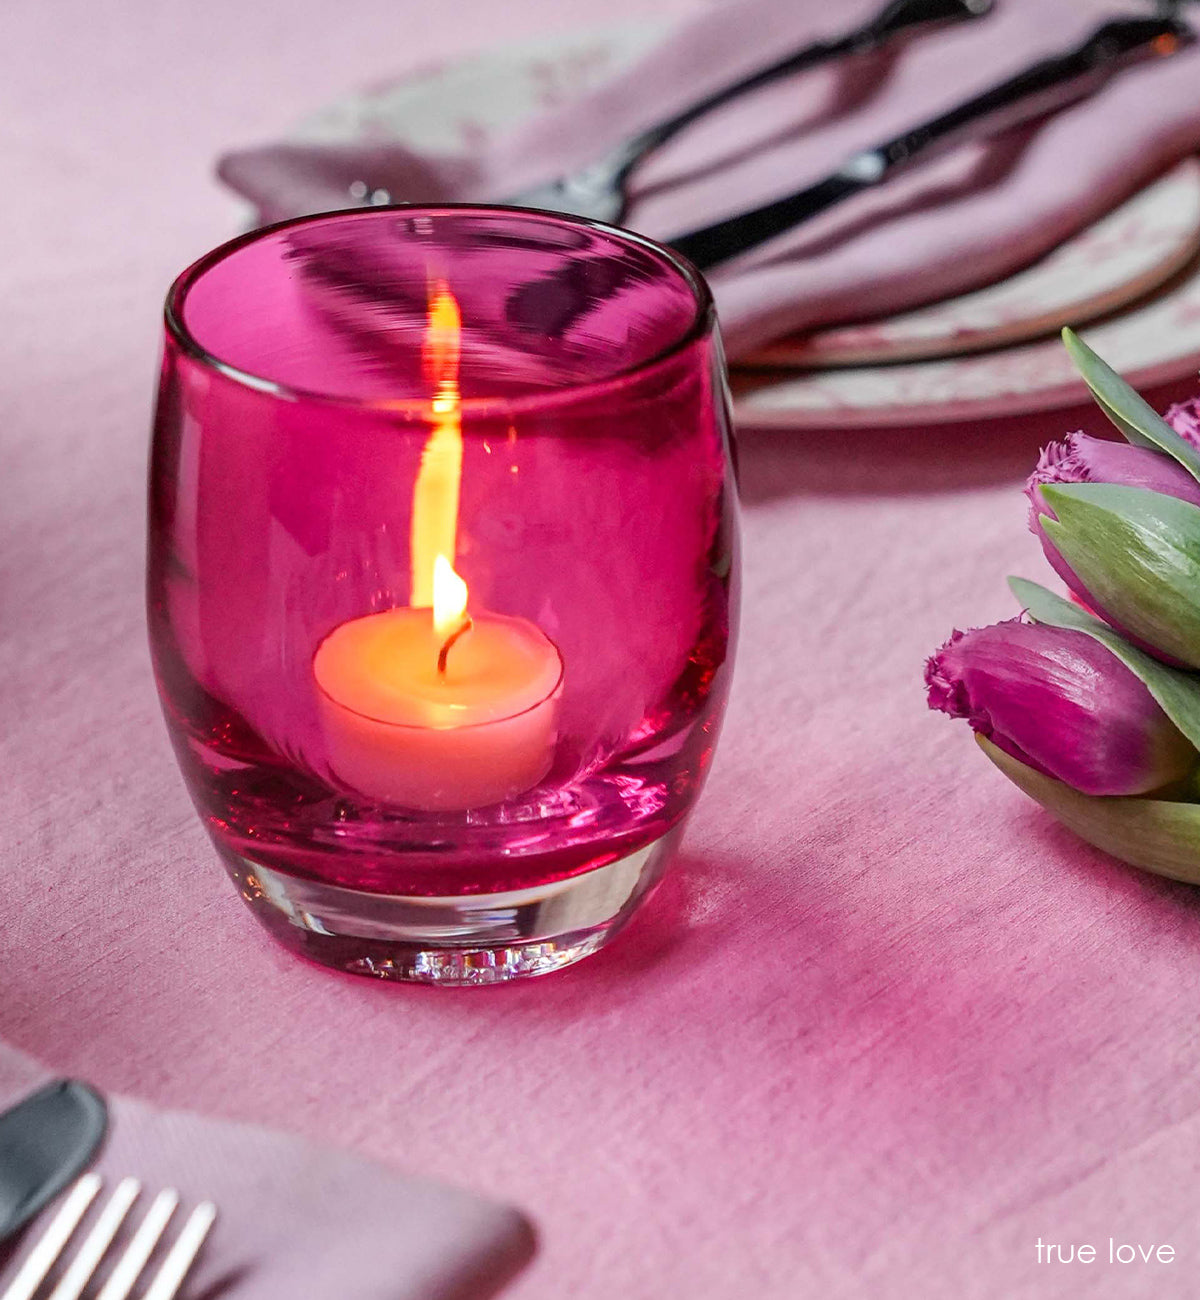 true love, transparent deep raspberry pink, hand-blown glass votive candle holder on a pink table cloth.